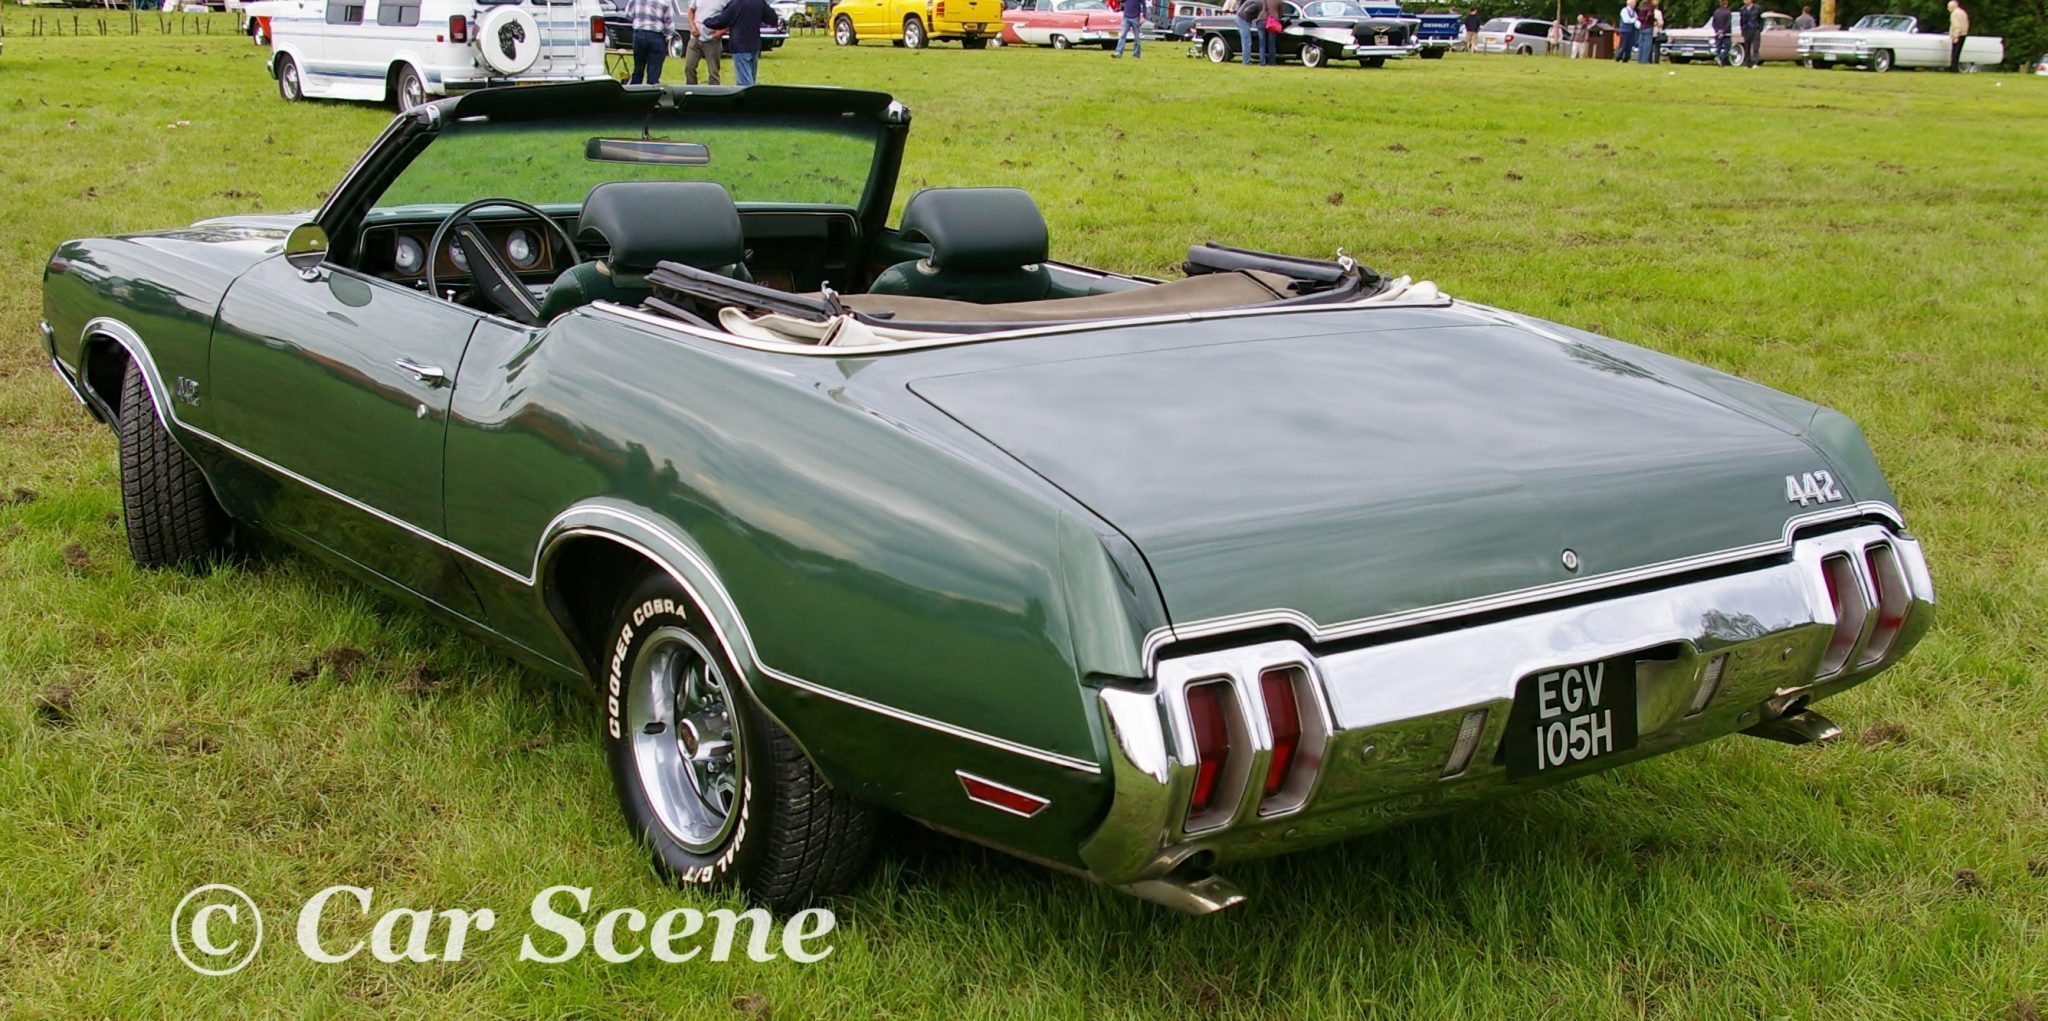 1970 Oldsmobile 442 Convertible rear three quarters view